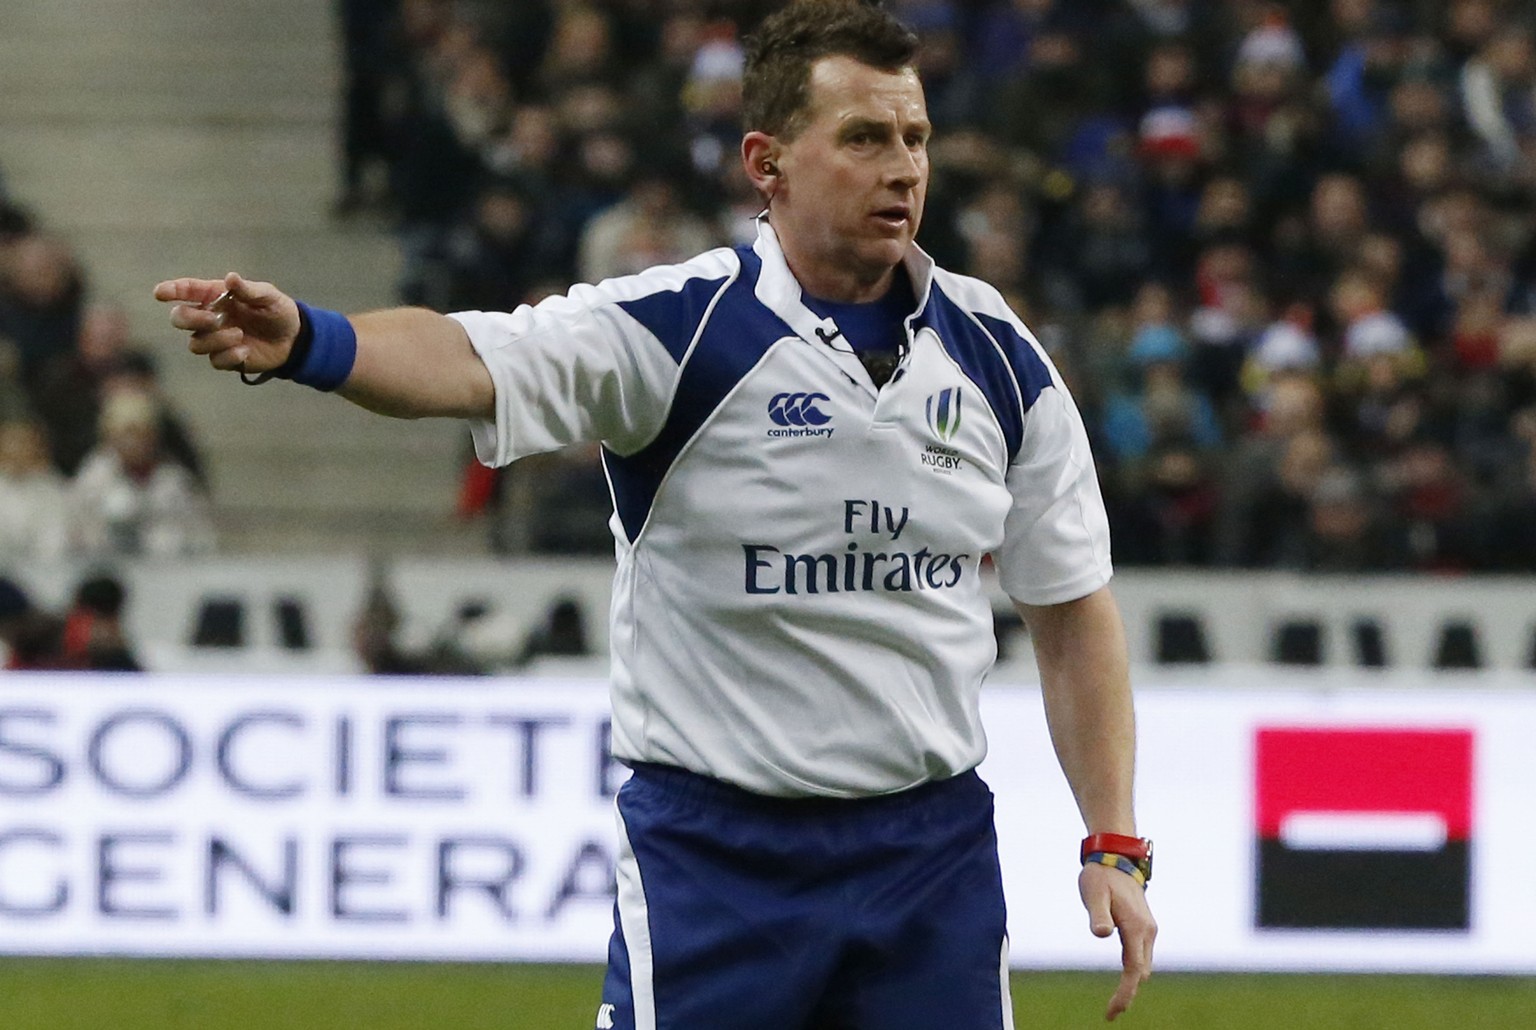 FILE - This Saturday Feb. 7, 2015, file photo shows referee Nigel Owens gesturing during a six nations rugby union international match between France and Scotland at the Stade de France stadium in Sai ...